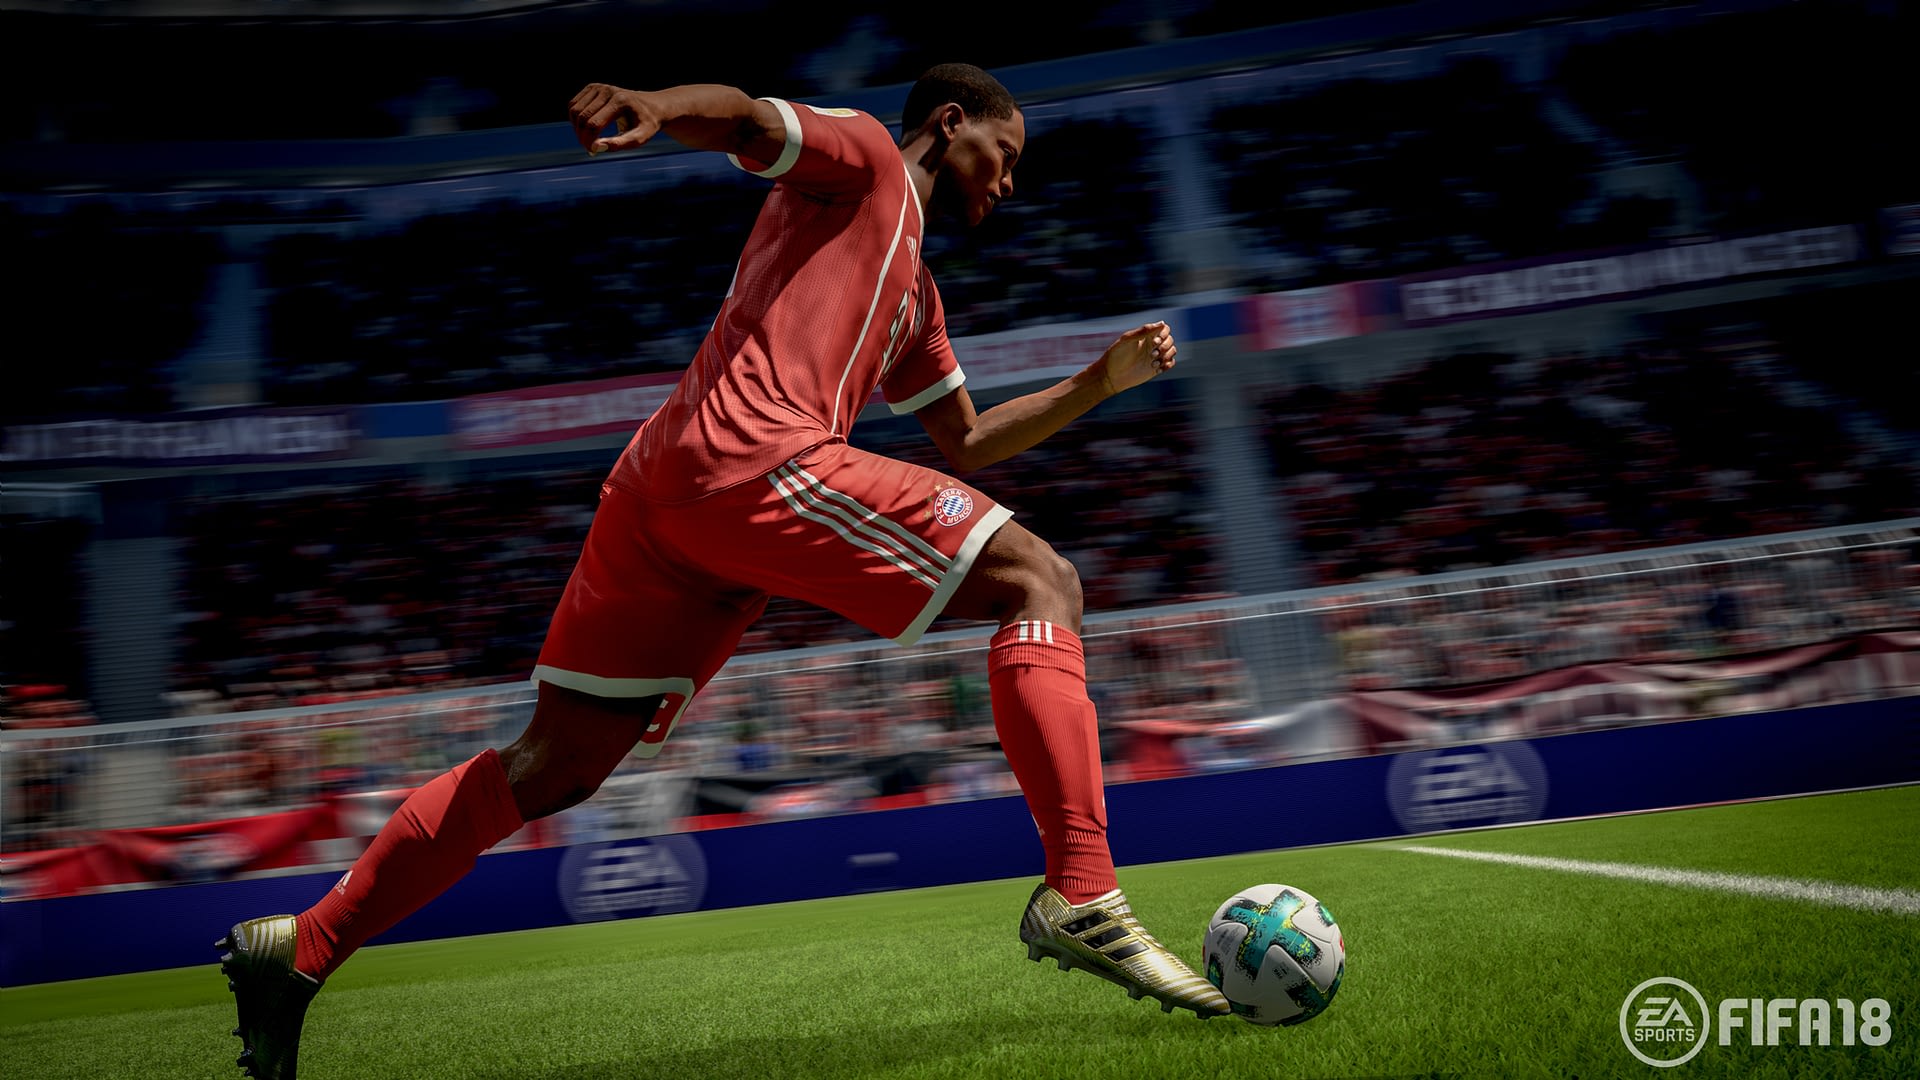 Review: FIFA 18 excels in storytelling but suffers from gameplay inconsistencies